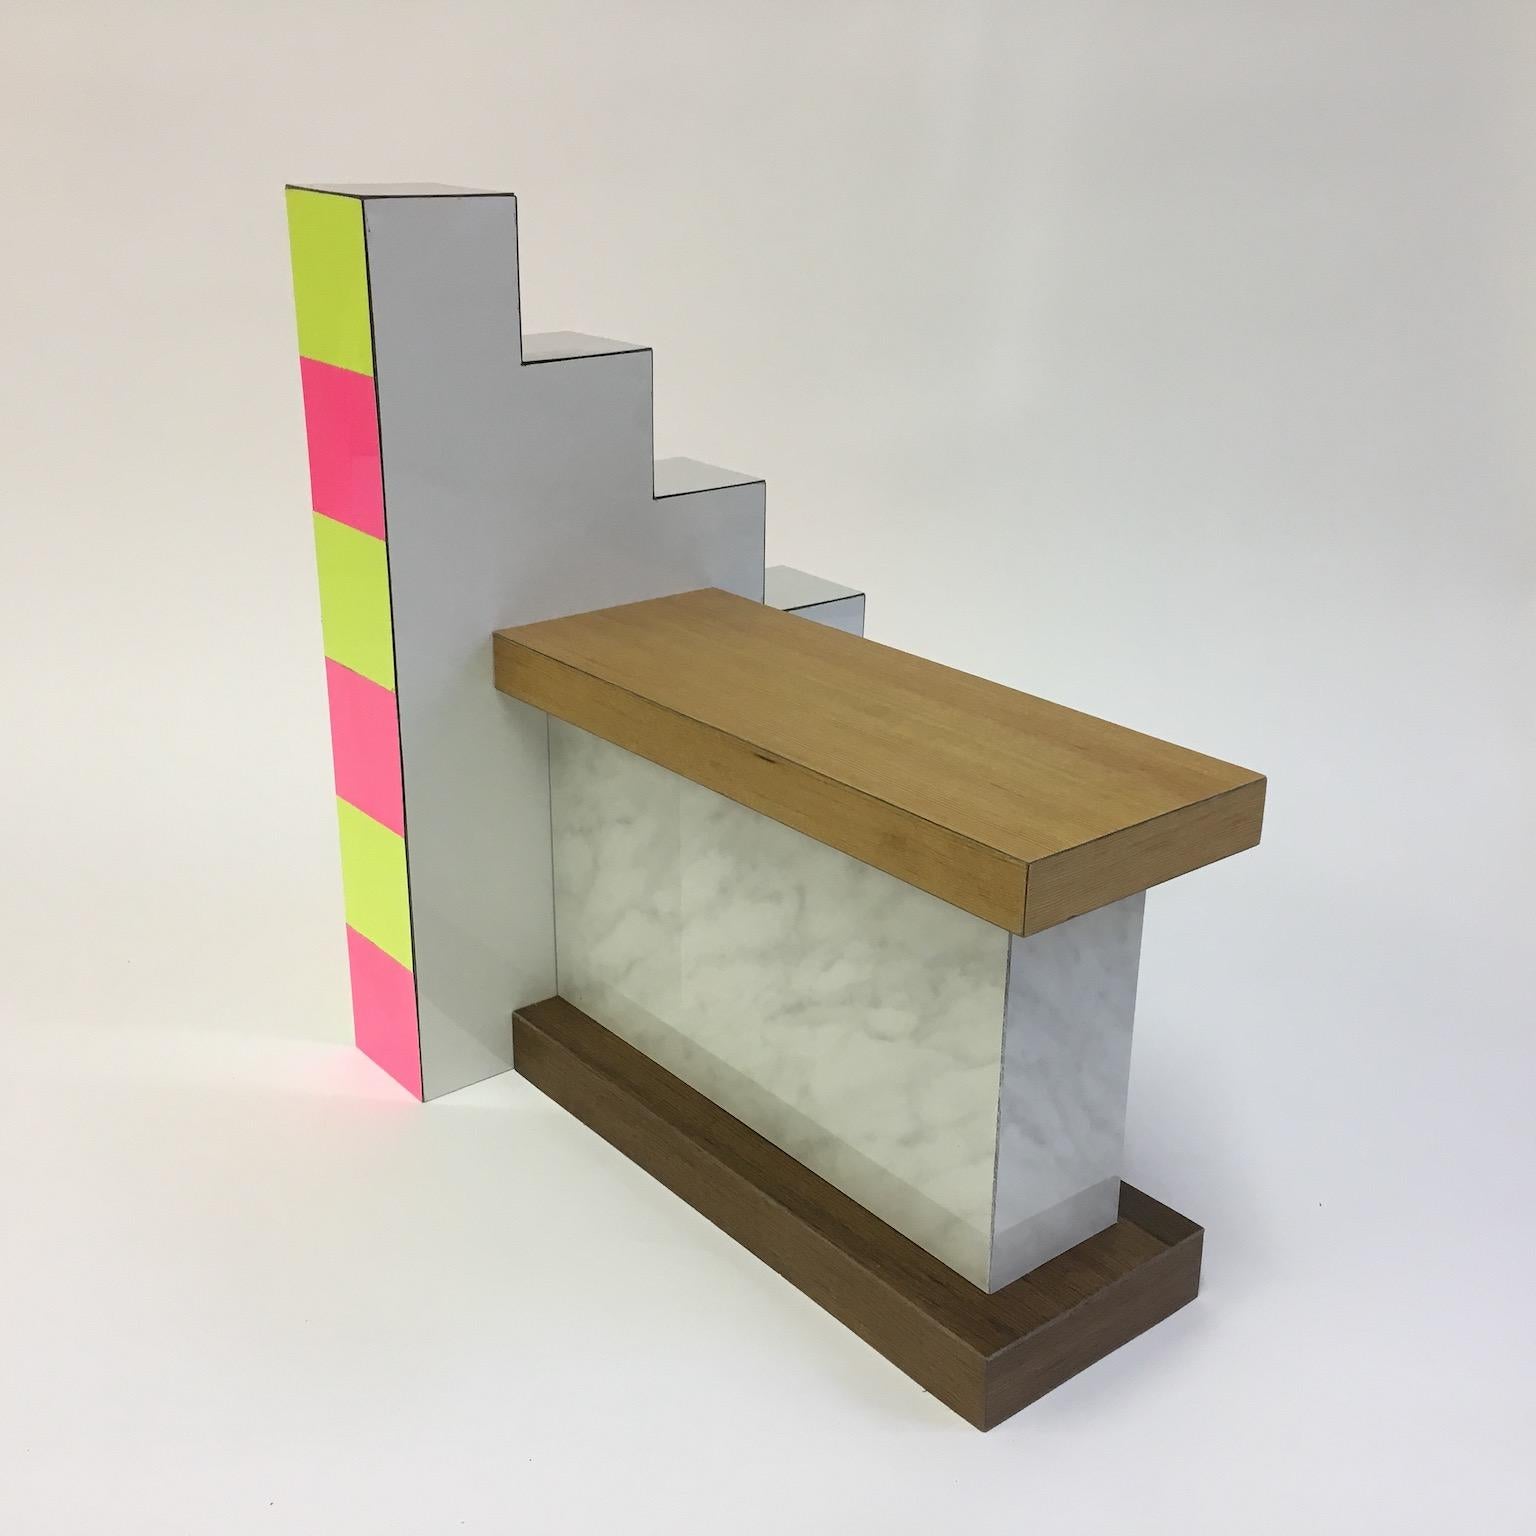 Laminated “Ziggurat 4” by Russell Bamber 2018, Fluorescent and Colored Laminates For Sale